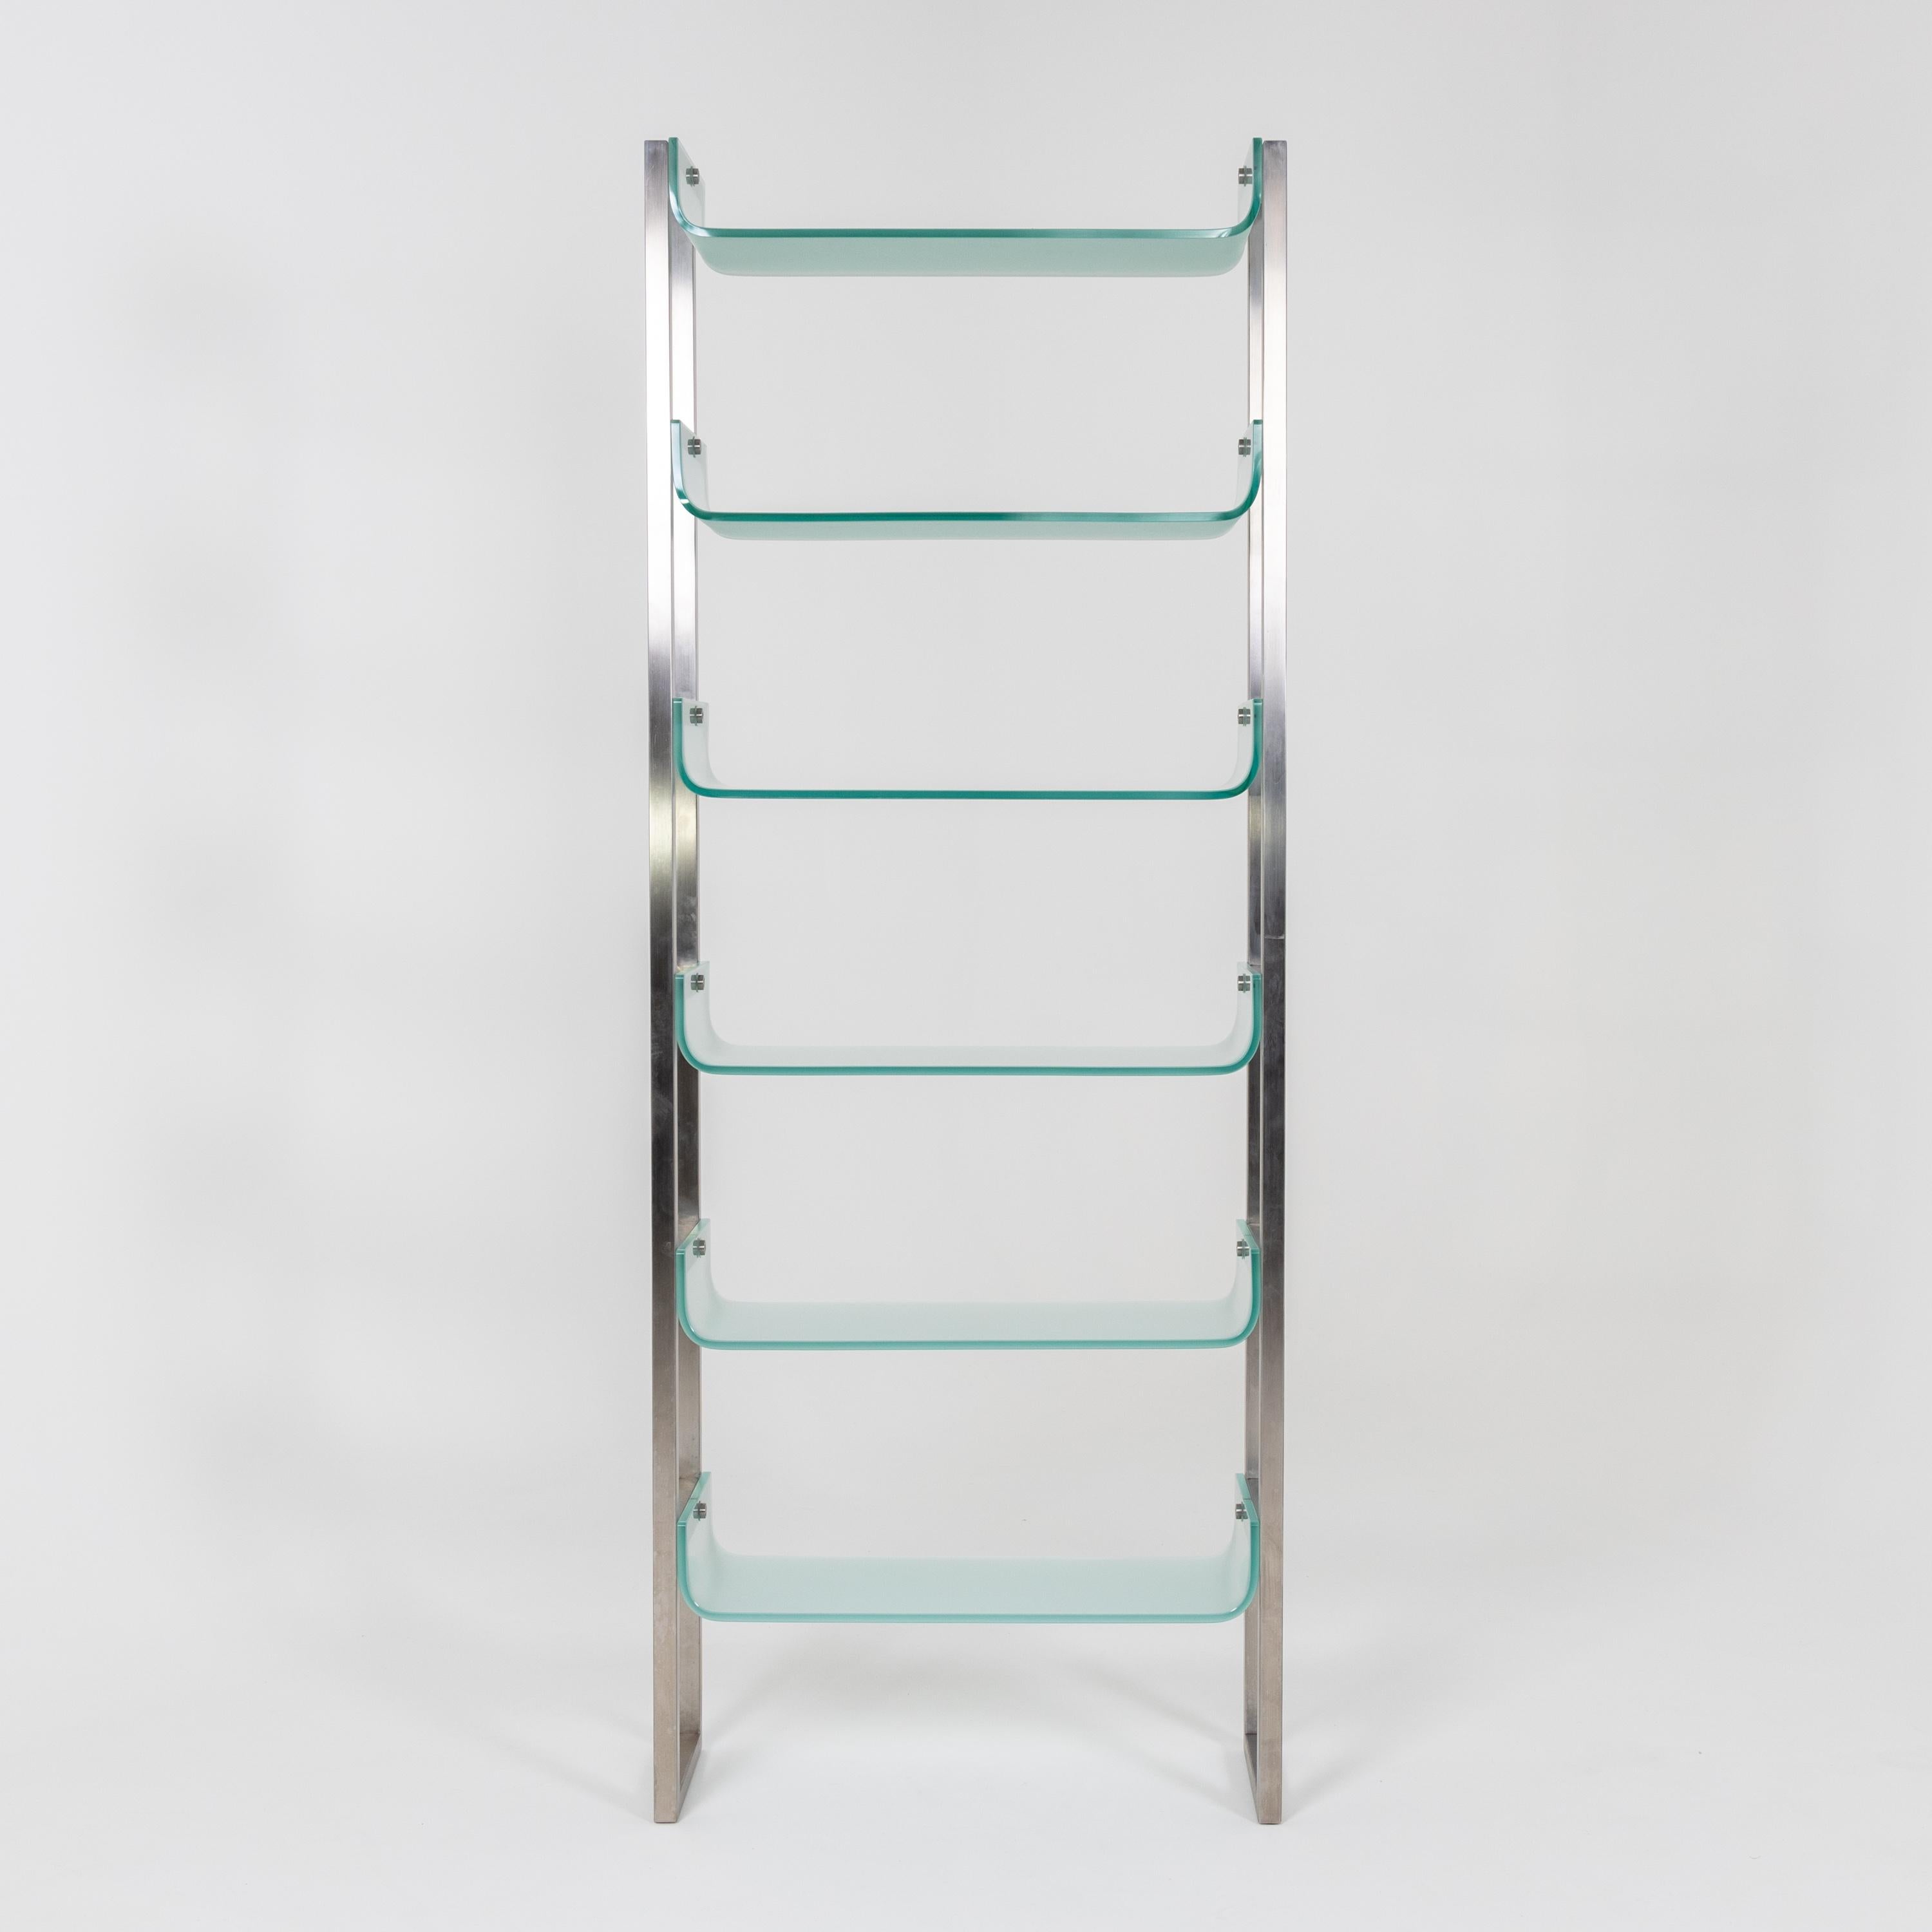 Pair of steel bookcases with dish-shaped shelves of light blue glass.